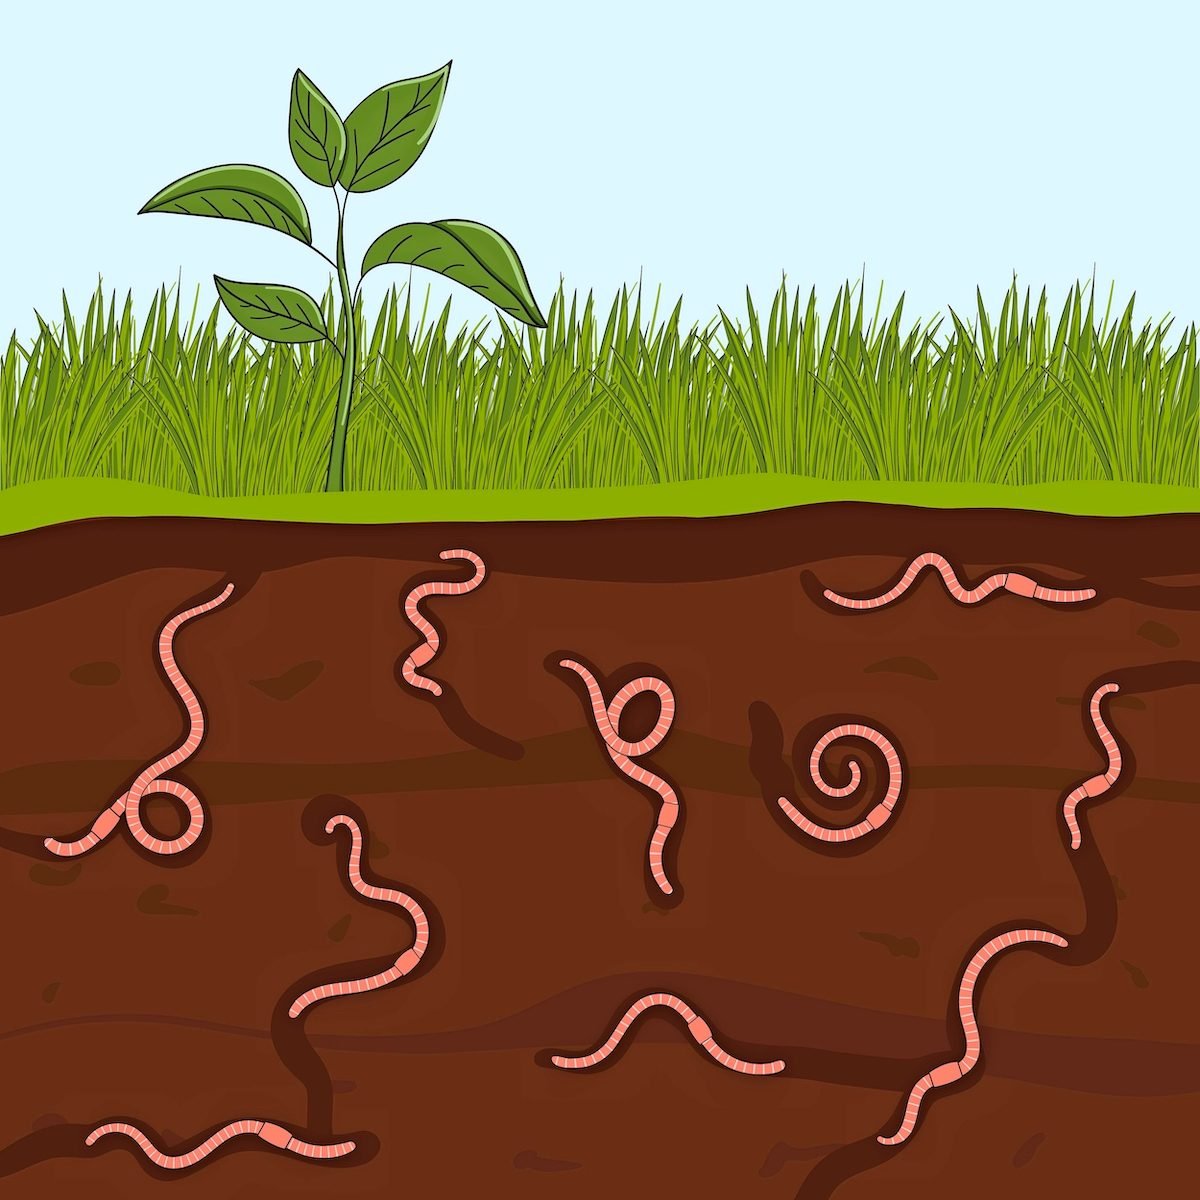 7 Earthworm Facts You Should Know - Birds and Blooms